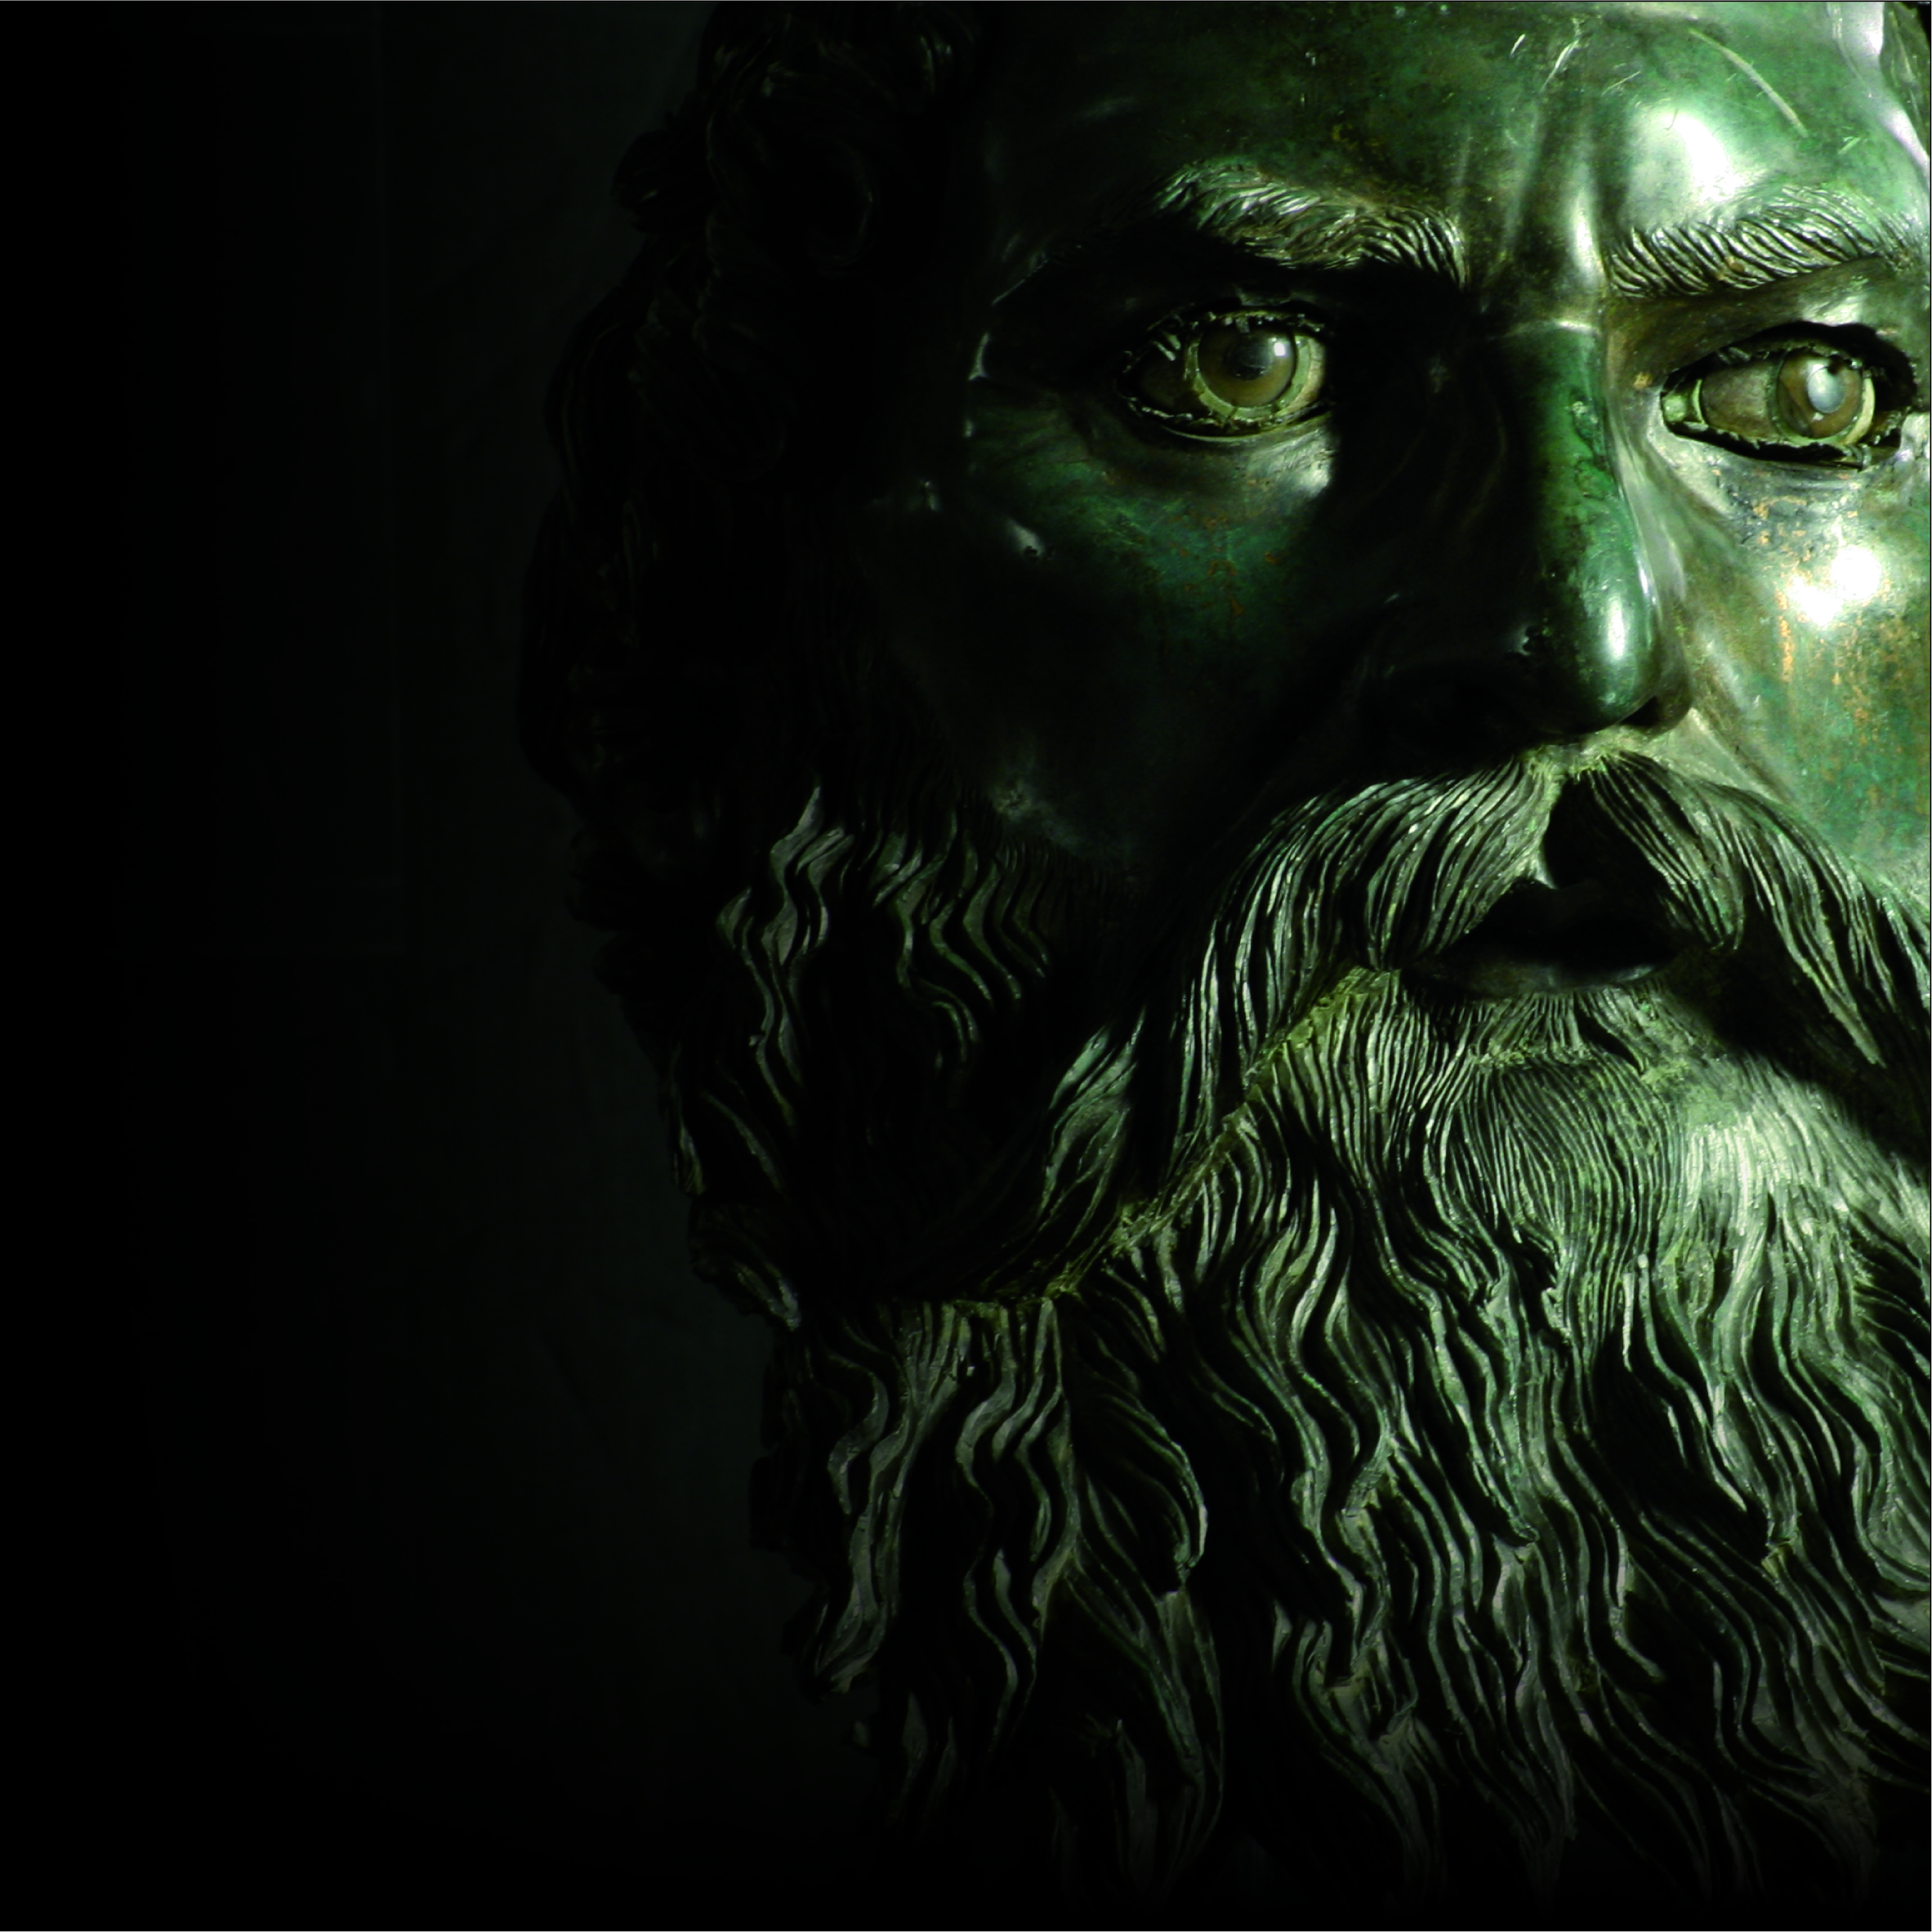 Seuthes the Immortal. Secrets of a Thracian king